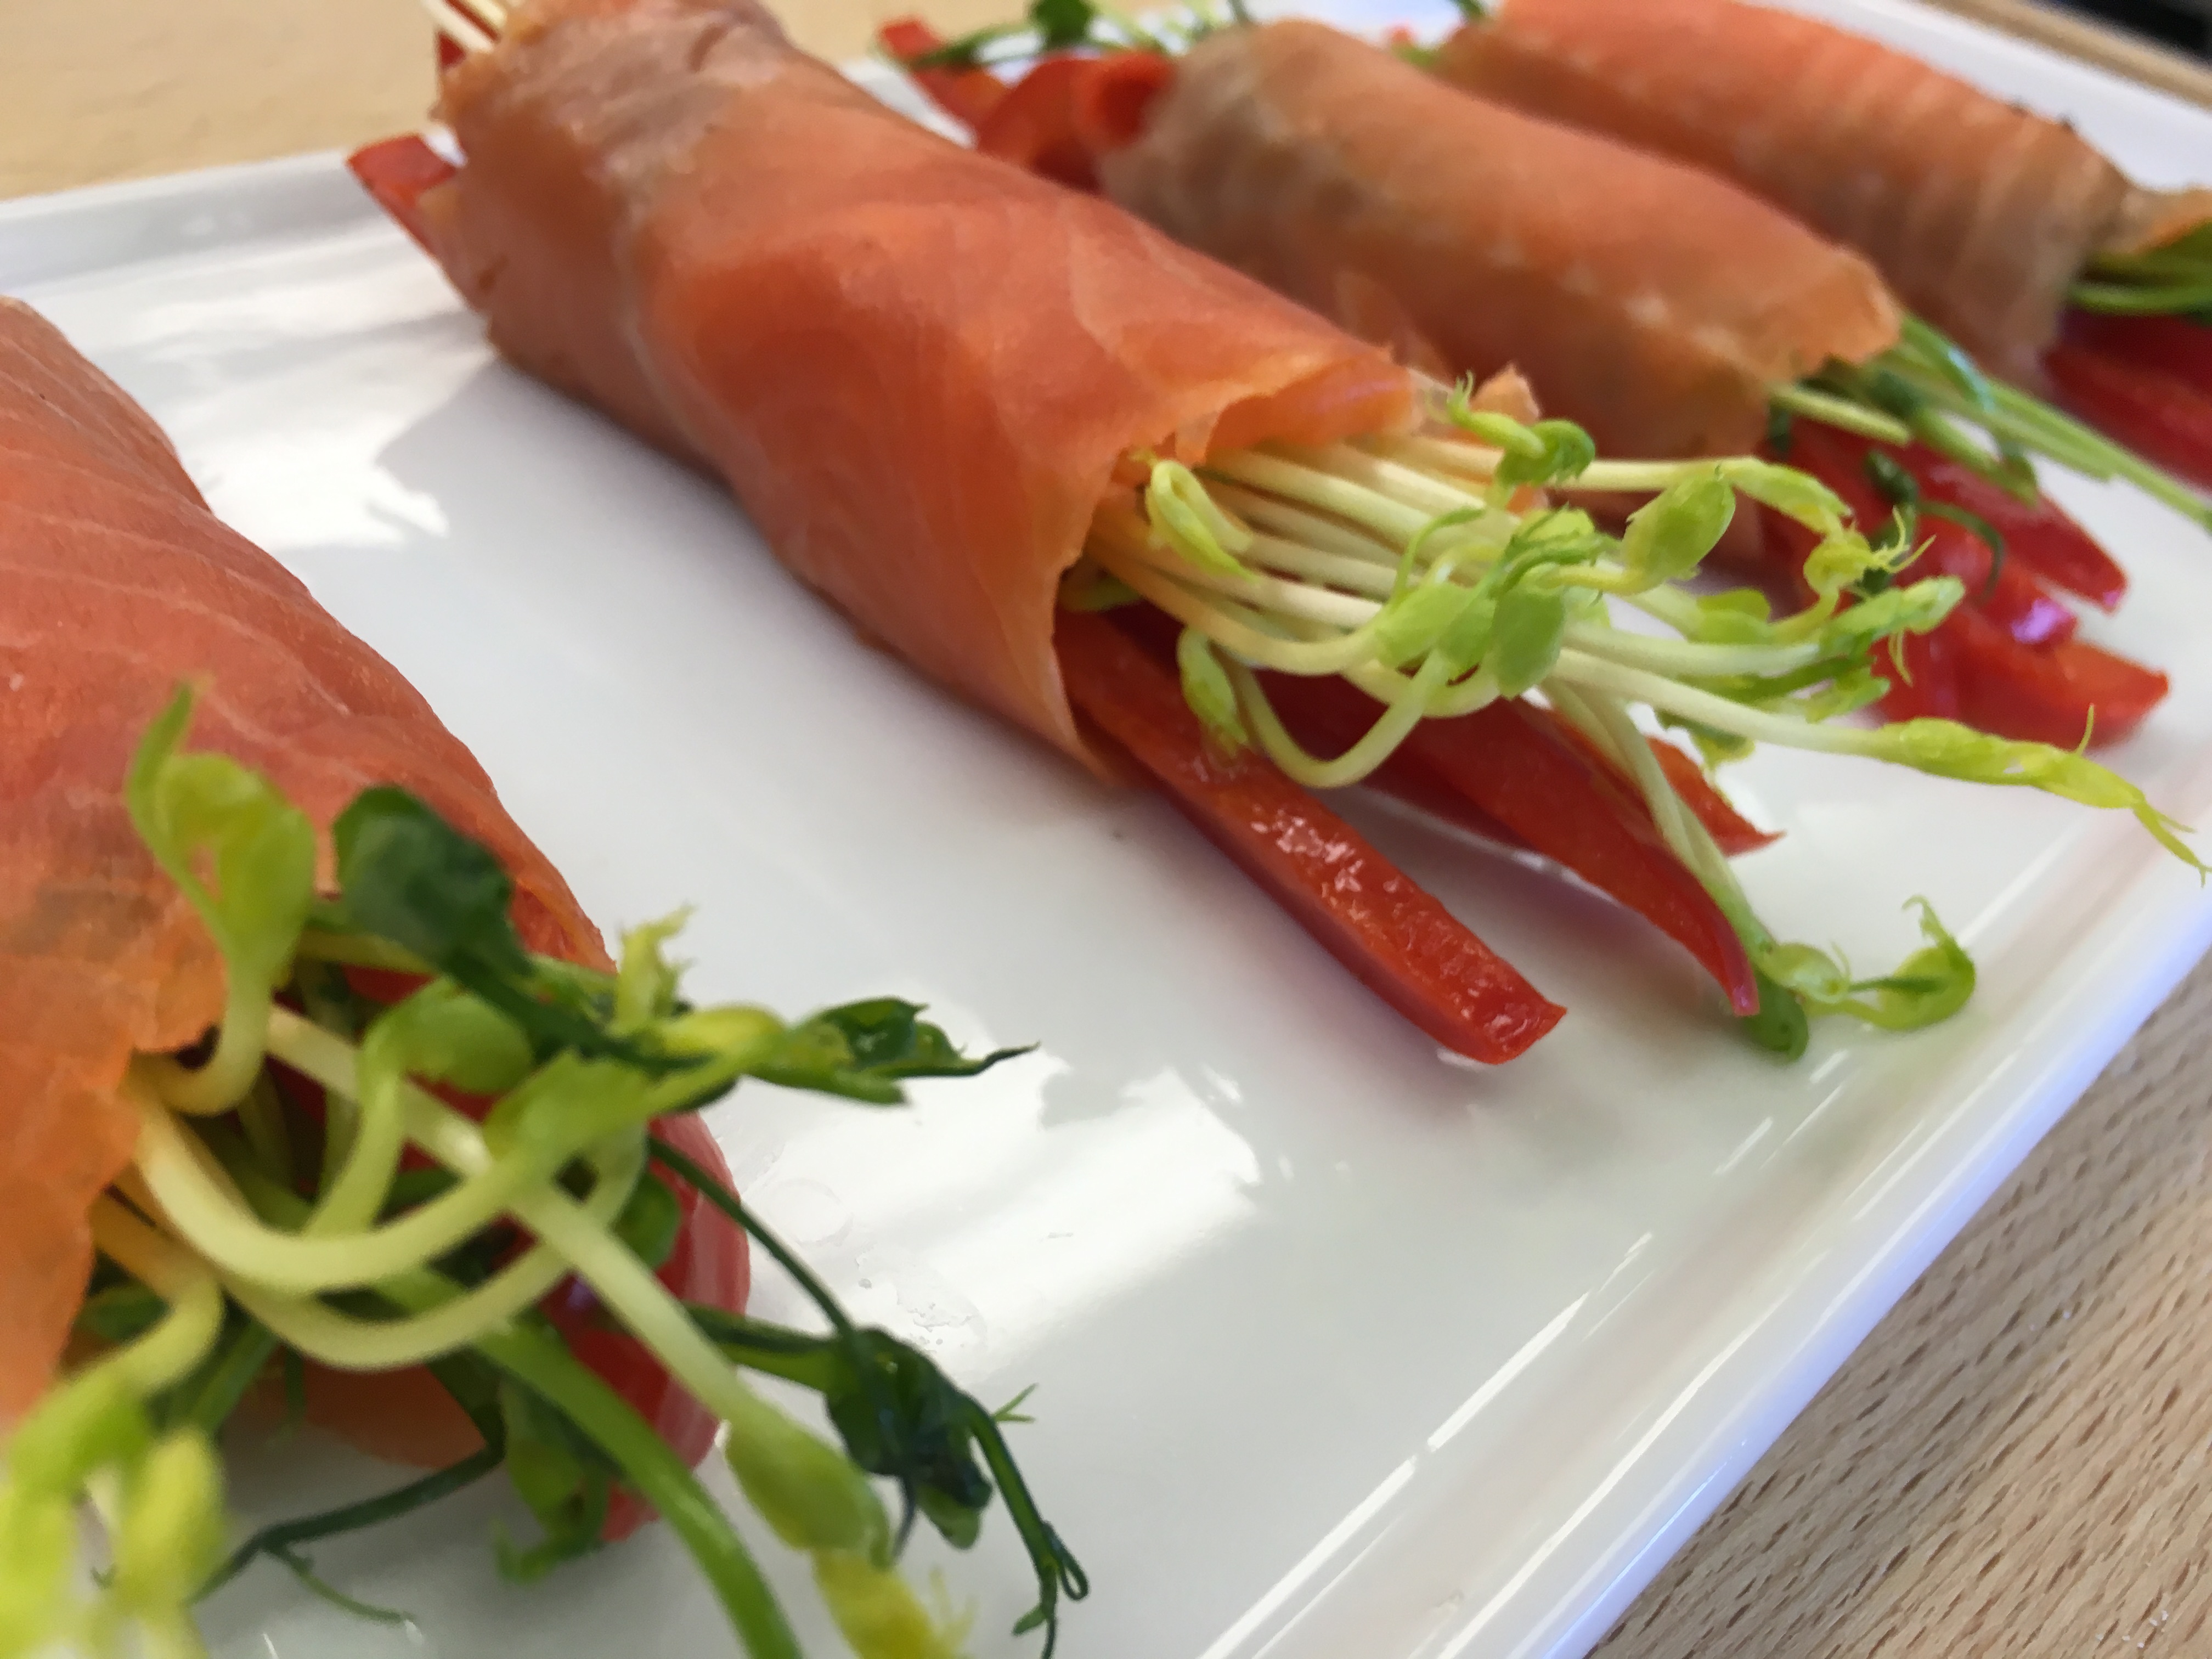 With vibrant colors & an equisite taste, this Bell Pepper Smoked Salmon Roll recipe is sure to wow! Who said healthy had to be hard?